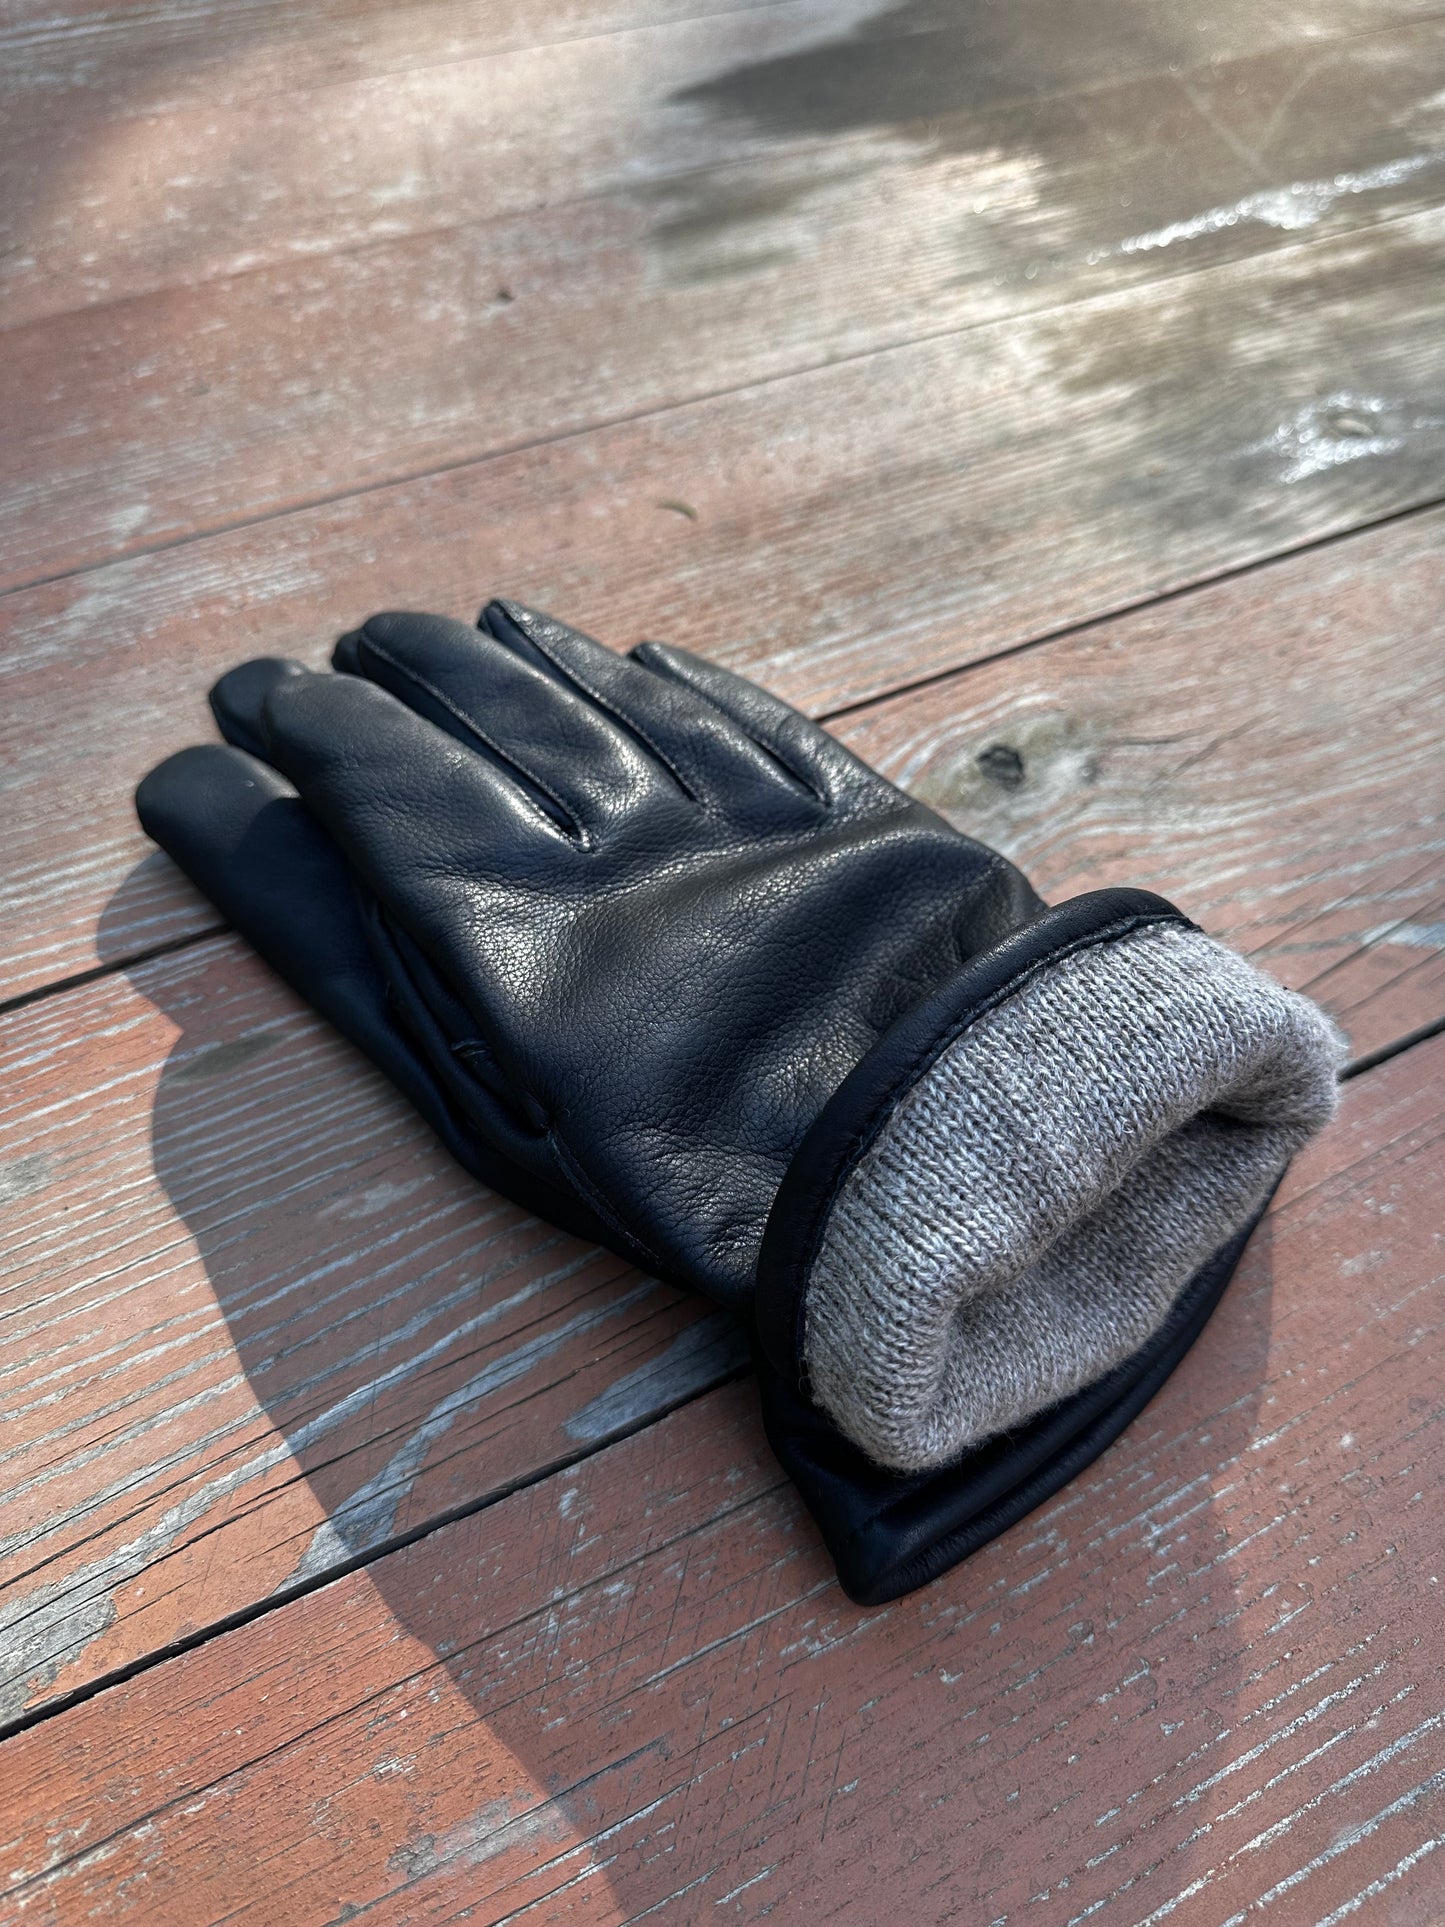 Breathable leather gloves